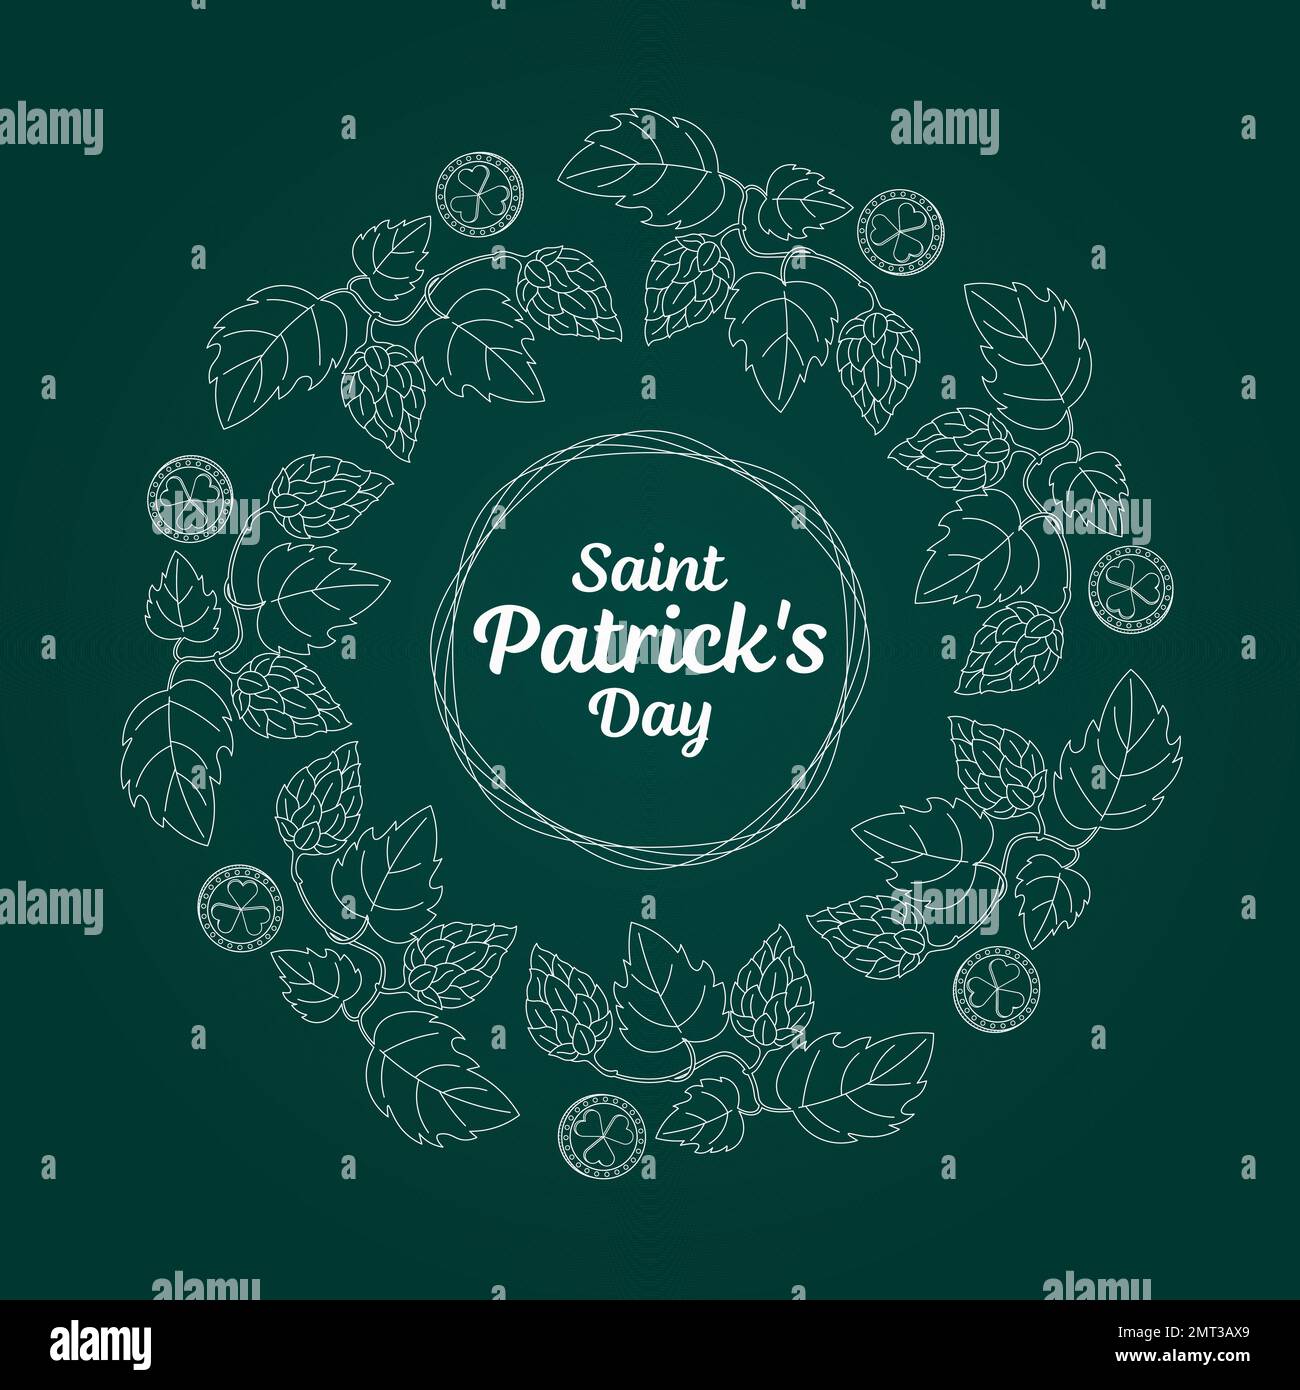 saint patricks day background with ornament from coins and hops inflorescence Stock Vector